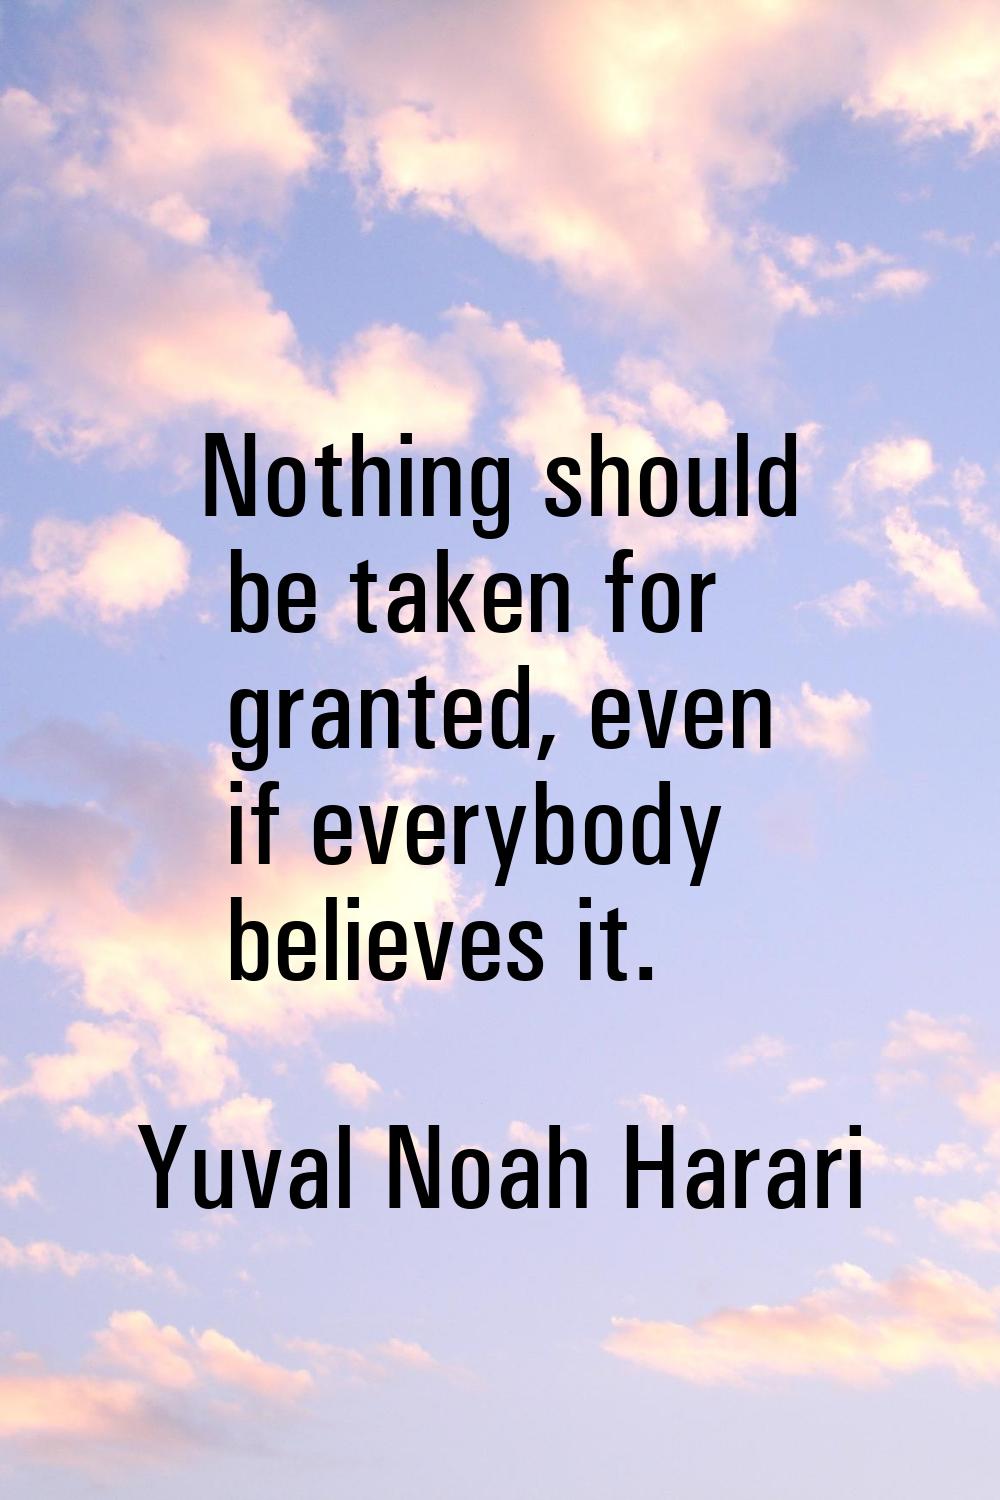 Nothing should be taken for granted, even if everybody believes it.